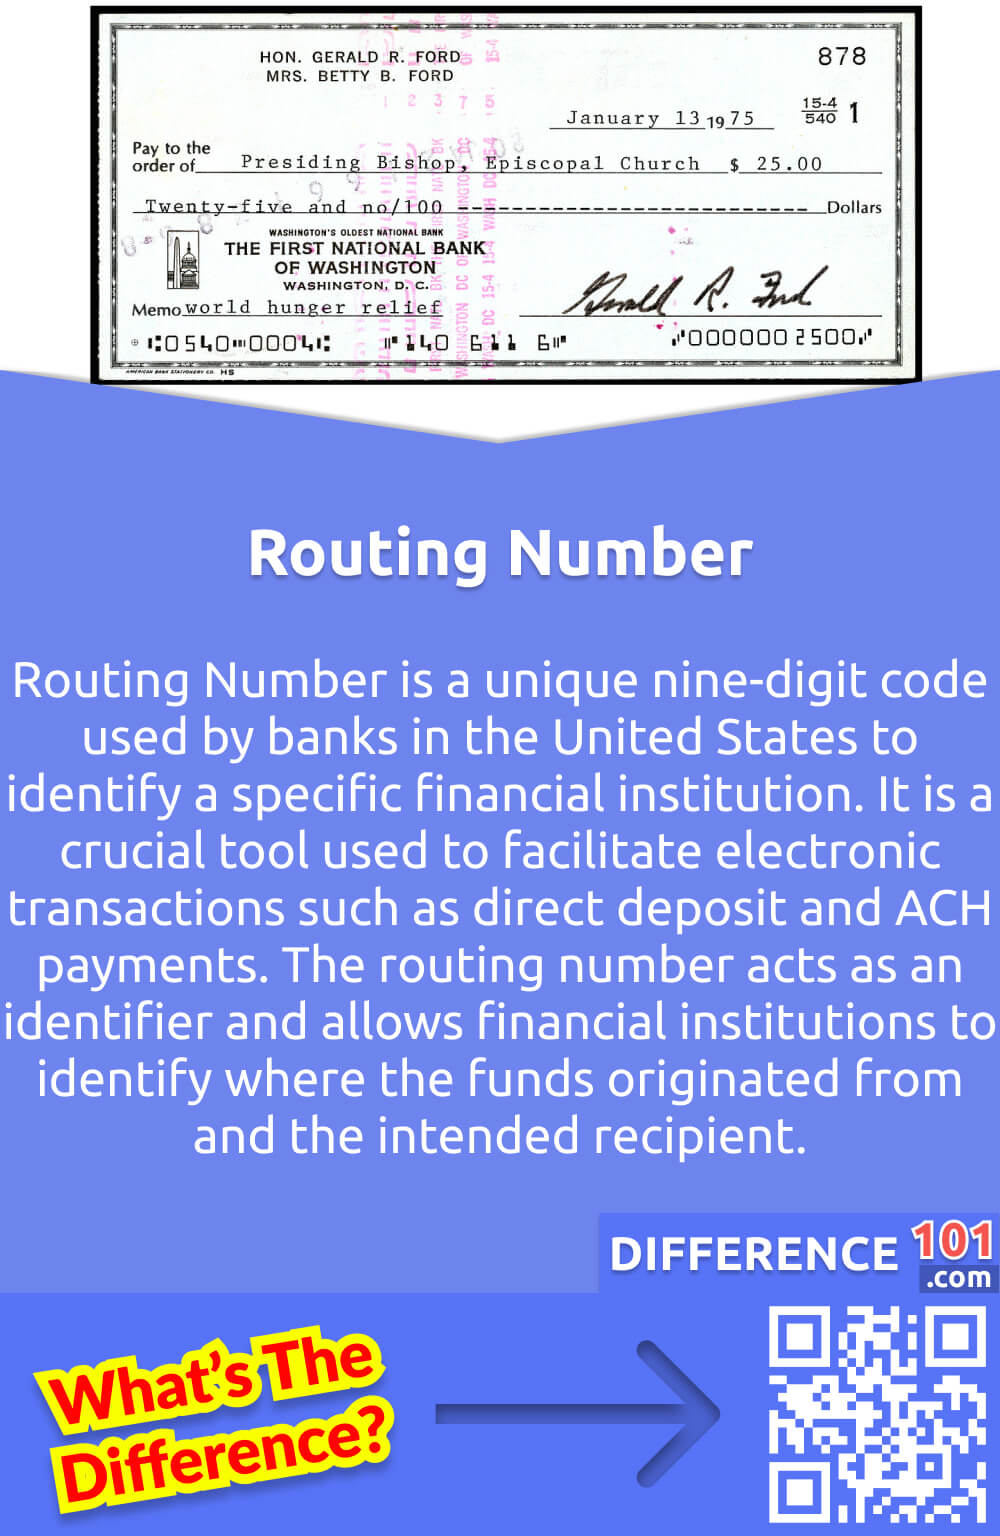 What Is Routing Number? Routing Number is a unique nine-digit code used by banks in the United States to identify a specific financial institution. It is a crucial tool used to facilitate electronic transactions such as direct deposit and ACH payments. The routing number acts as an identifier and allows financial institutions to identify where the funds originated from and the intended recipient. As such, it is essential to ensure accuracy when providing routing numbers, as incorrect numbers can lead to delayed or failed transactions. Additionally, different routing numbers may apply to different transactions, such as wire transfers, international payments, and paper checks. Overall, the routing number plays a crucial role in enabling efficient and accurate electronic transactions between different financial institutions.